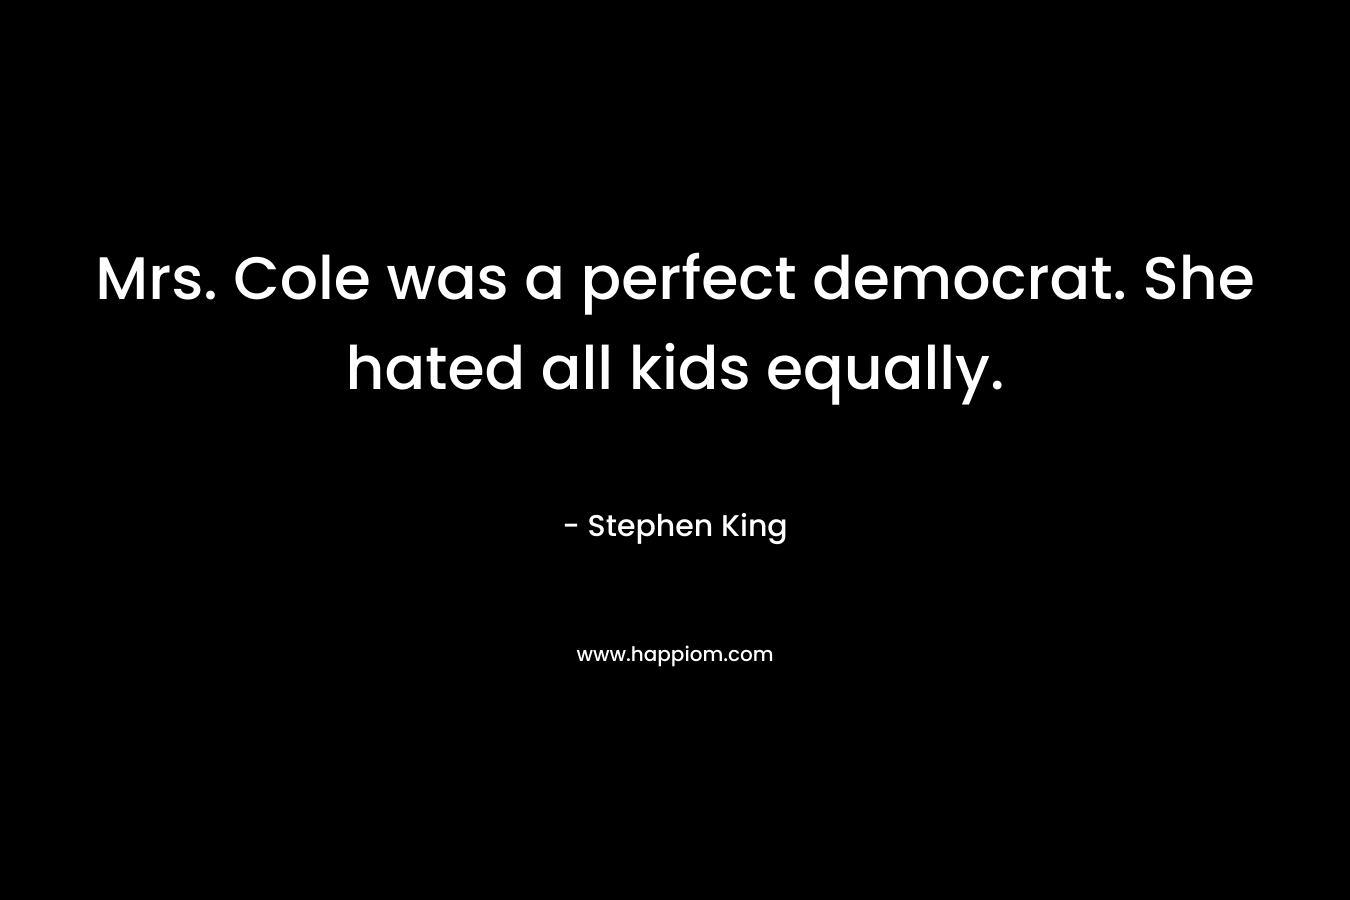 Mrs. Cole was a perfect democrat. She hated all kids equally. – Stephen King